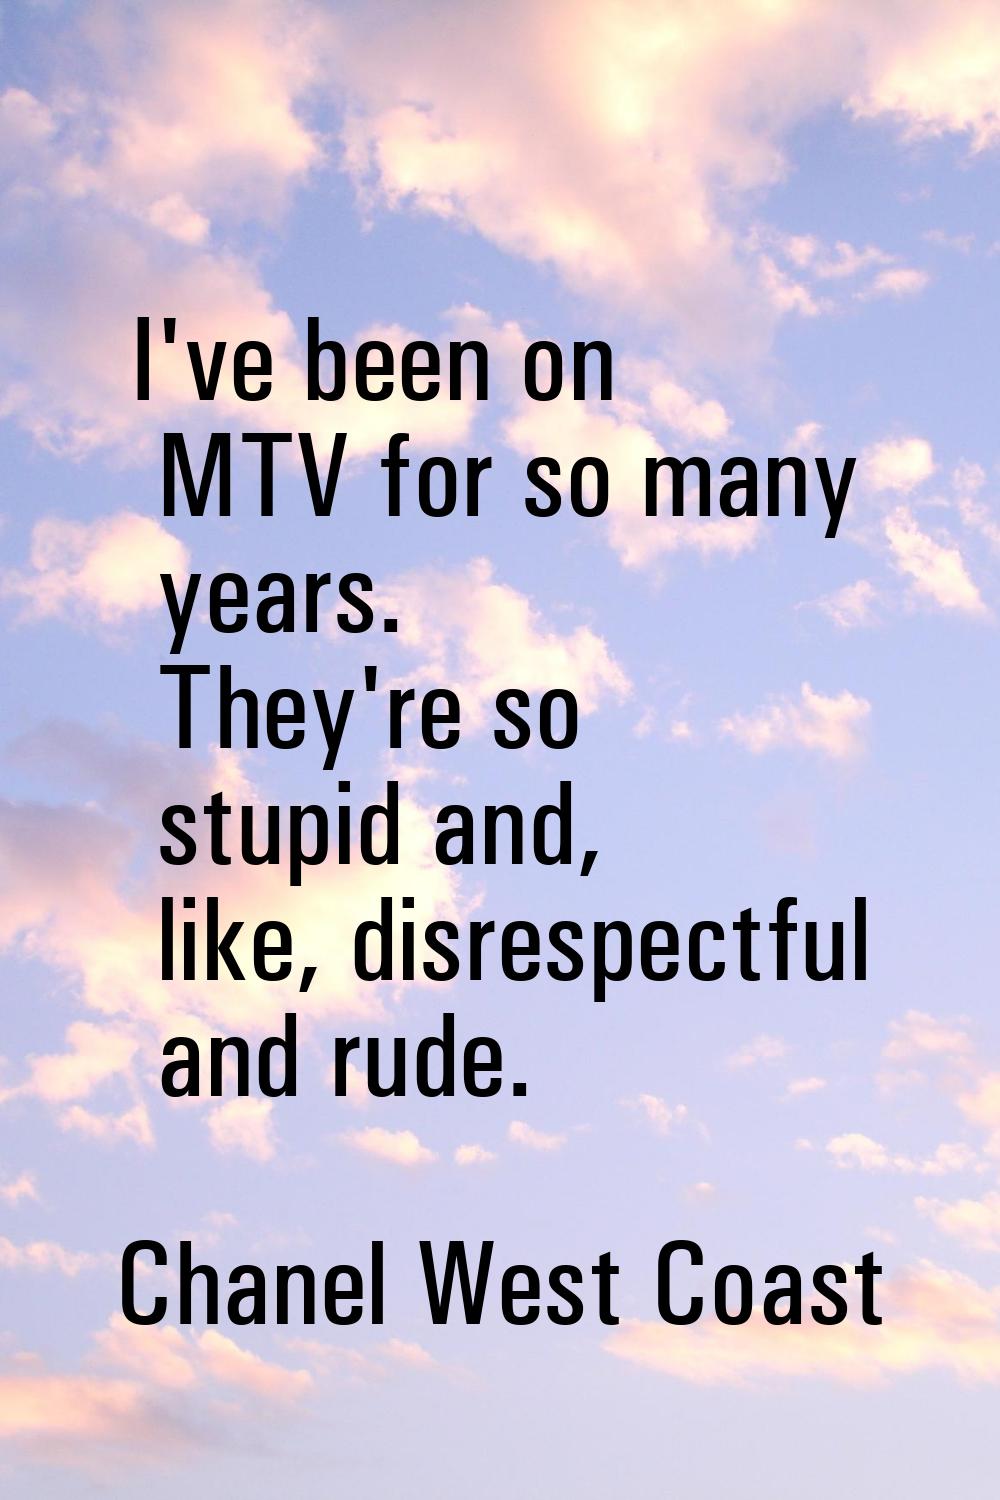 I've been on MTV for so many years. They're so stupid and, like, disrespectful and rude.